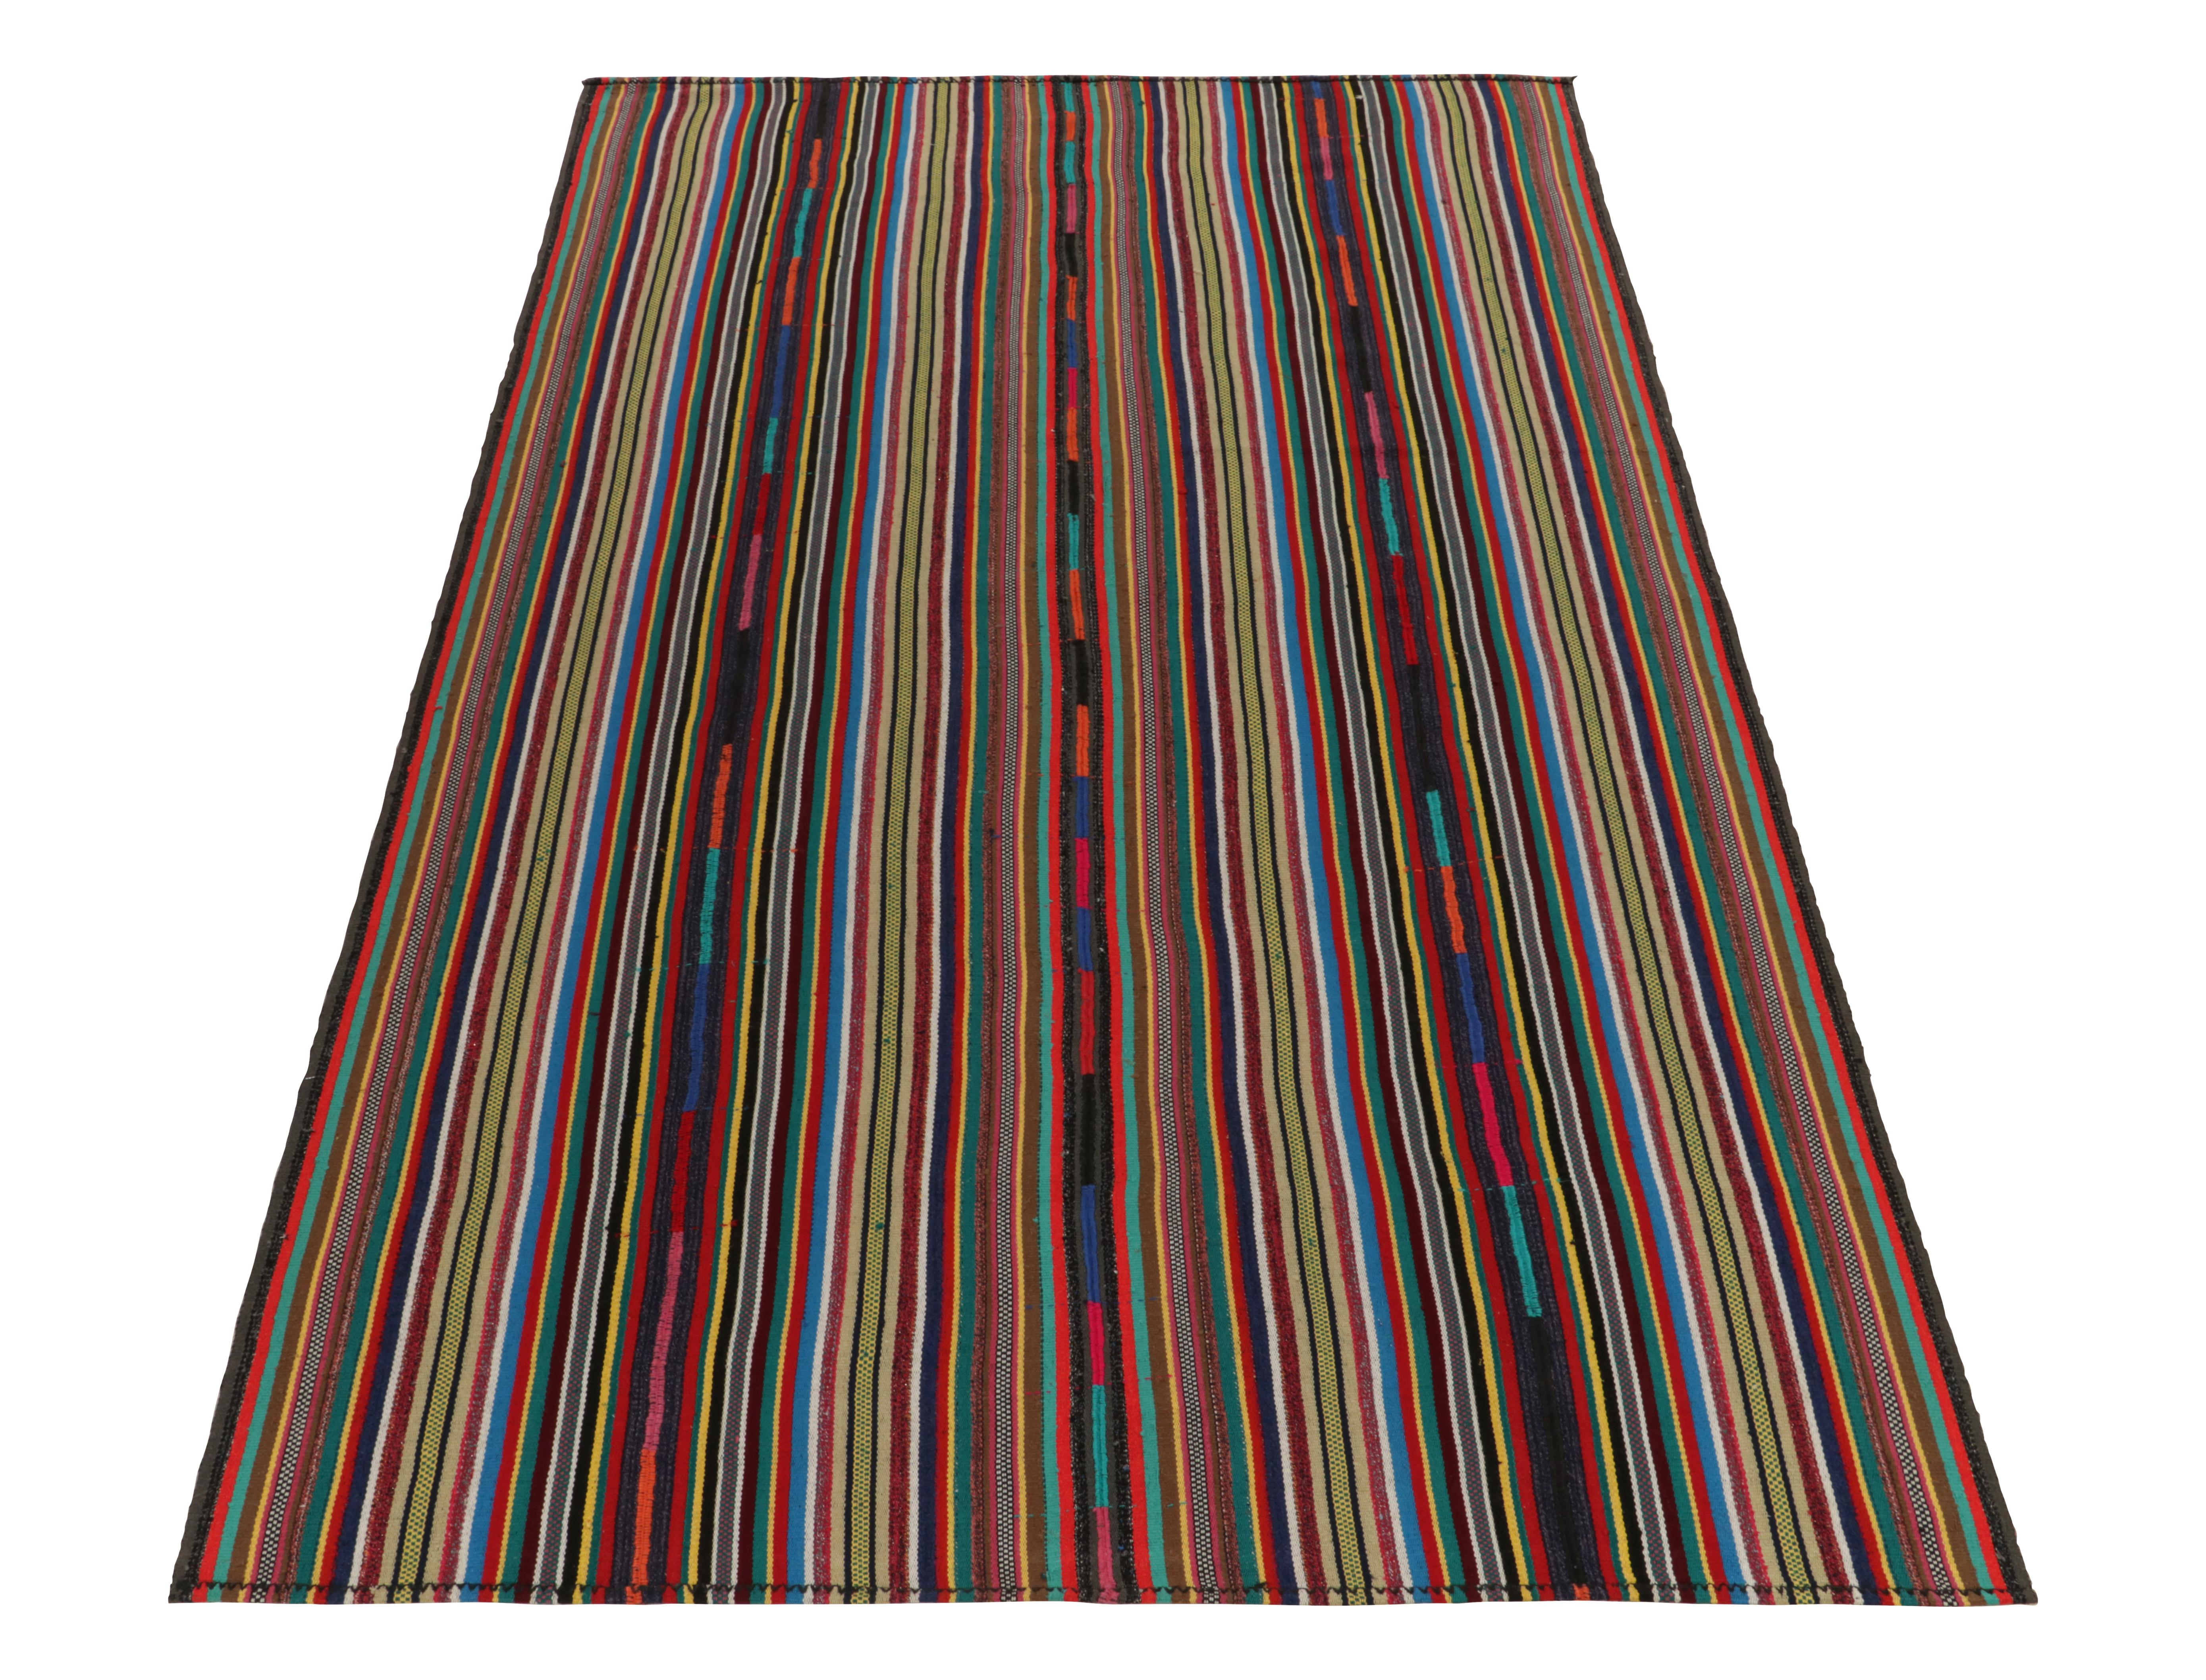 Originating from Turkey circa 1950-1960, a rare type of chaput kilim rug style now entering our Antique & Vintage selections. Characterized by fine detailing with the colors within the polychromatic stripes, the vibrant piece welcomes a departure